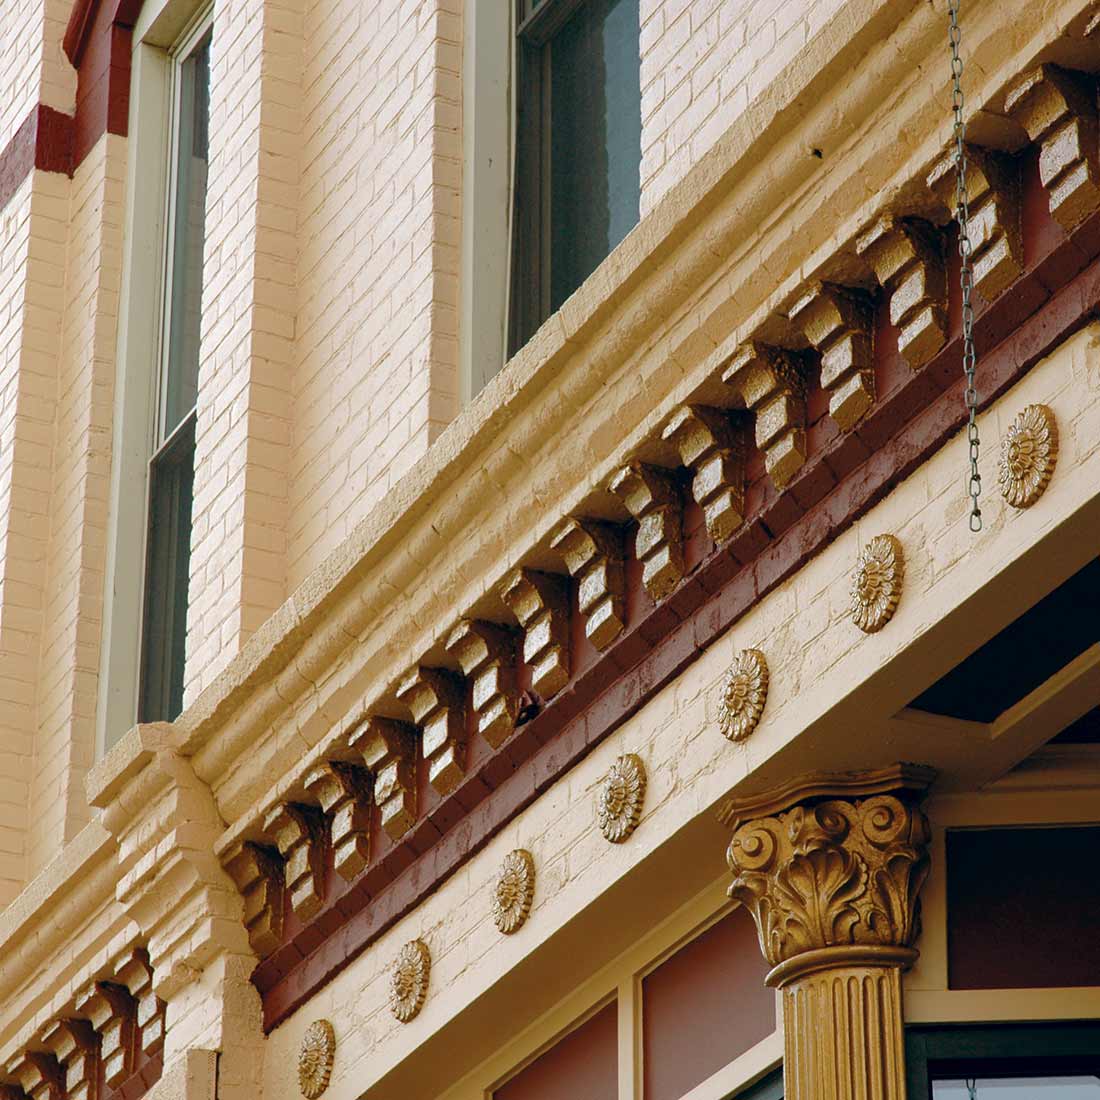 Painted exterior masonry details on the 1881 Frederick Rehfuss Building